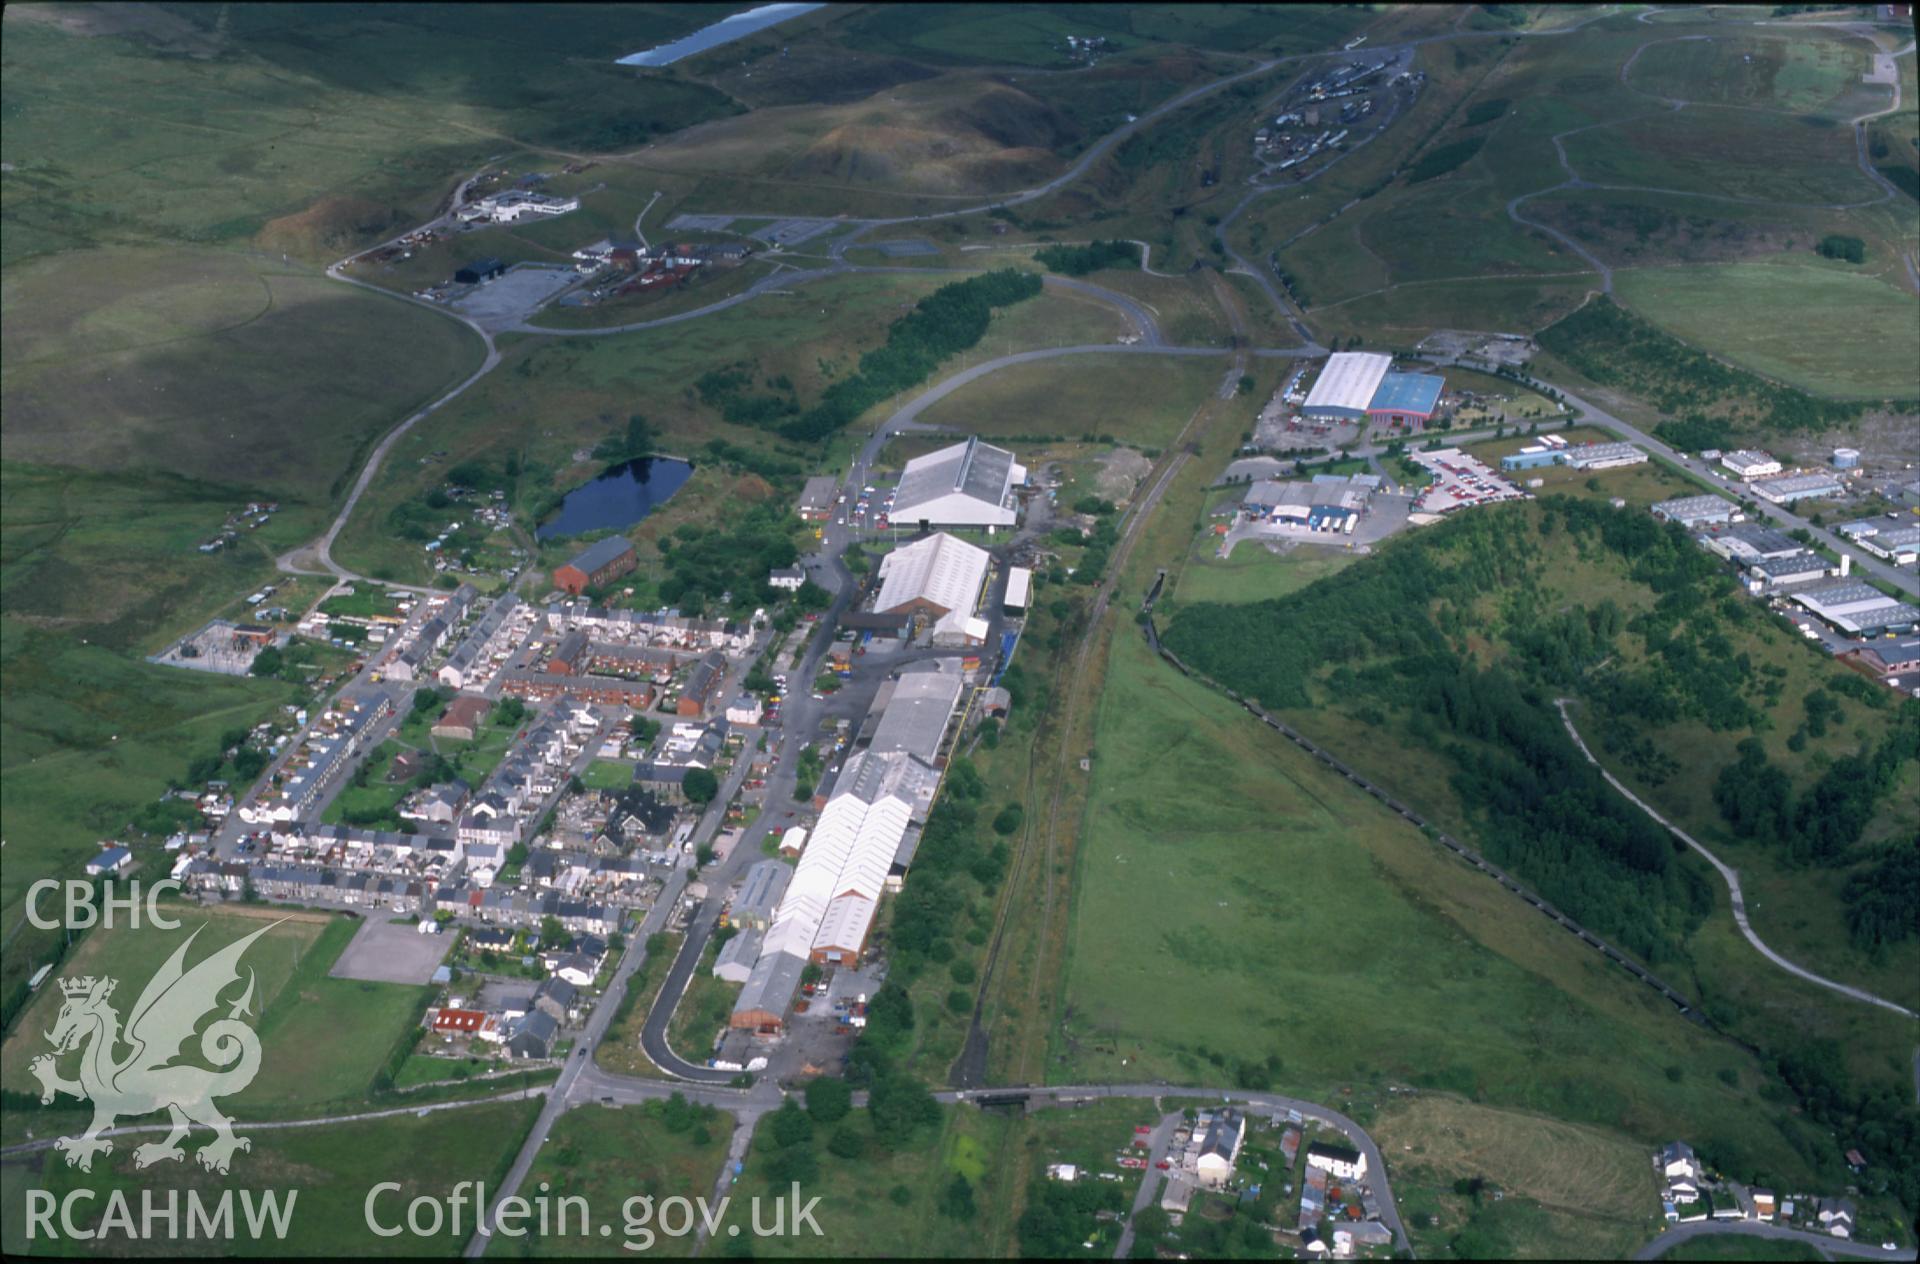 Slide of RCAHMW colour oblique aerial photograph of Forgeside, Blaenavon, taken by C.R. Musson, 24/7/1998.